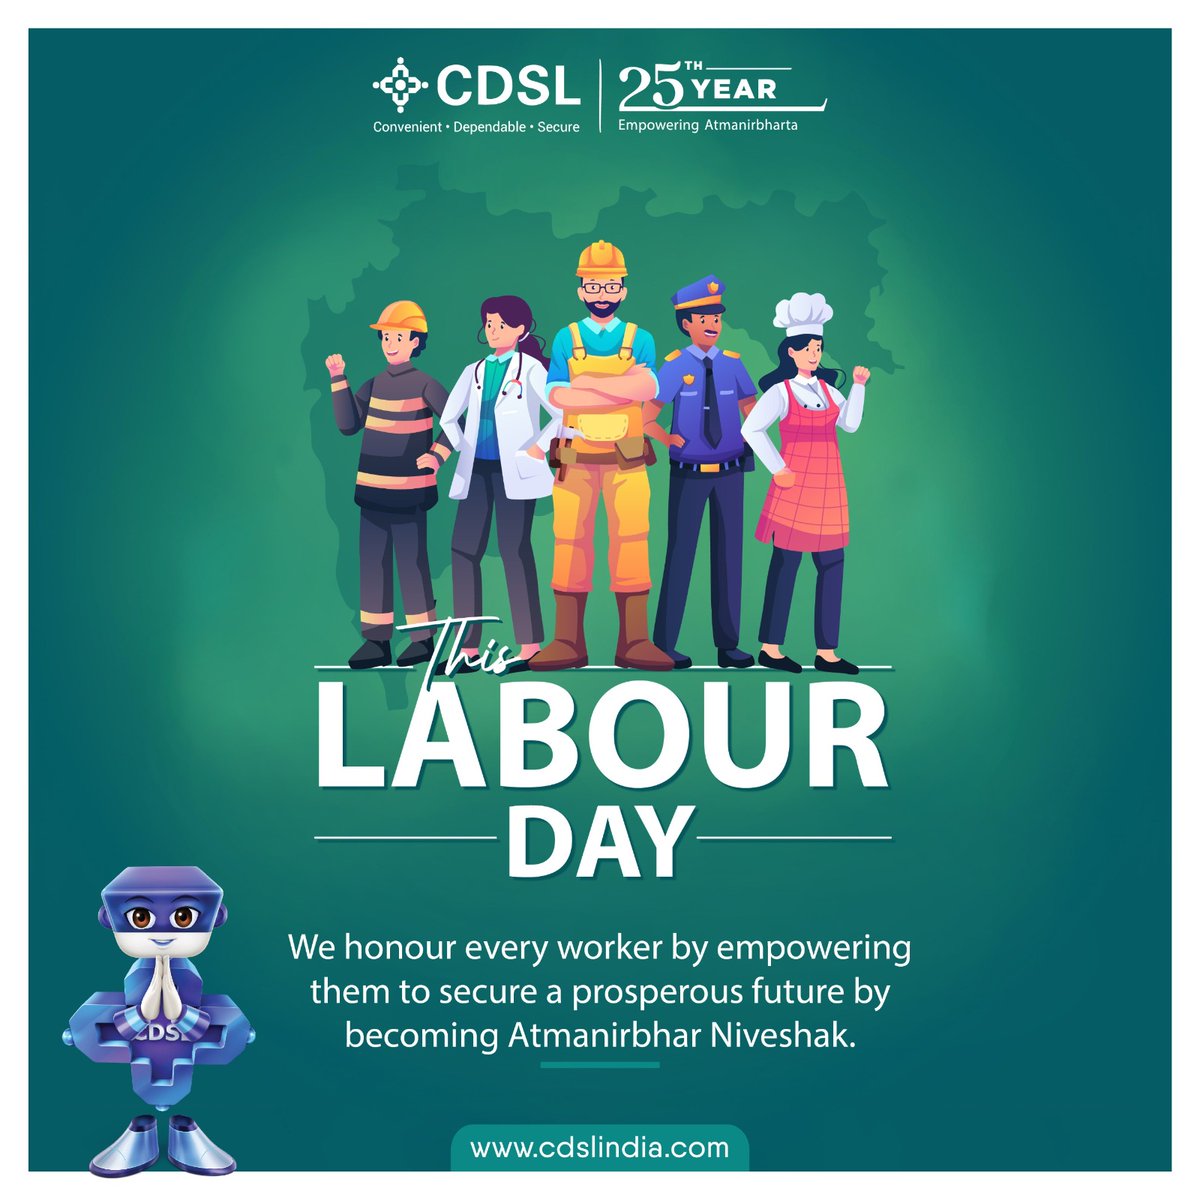 This Labour Day, we're committed to empowering workers as self-sufficient investors. With our reliable depository services, we make investing easy and secure for all, so that every worker can pursue financial independence. Because when you grow, the economy grows. #LabourDay